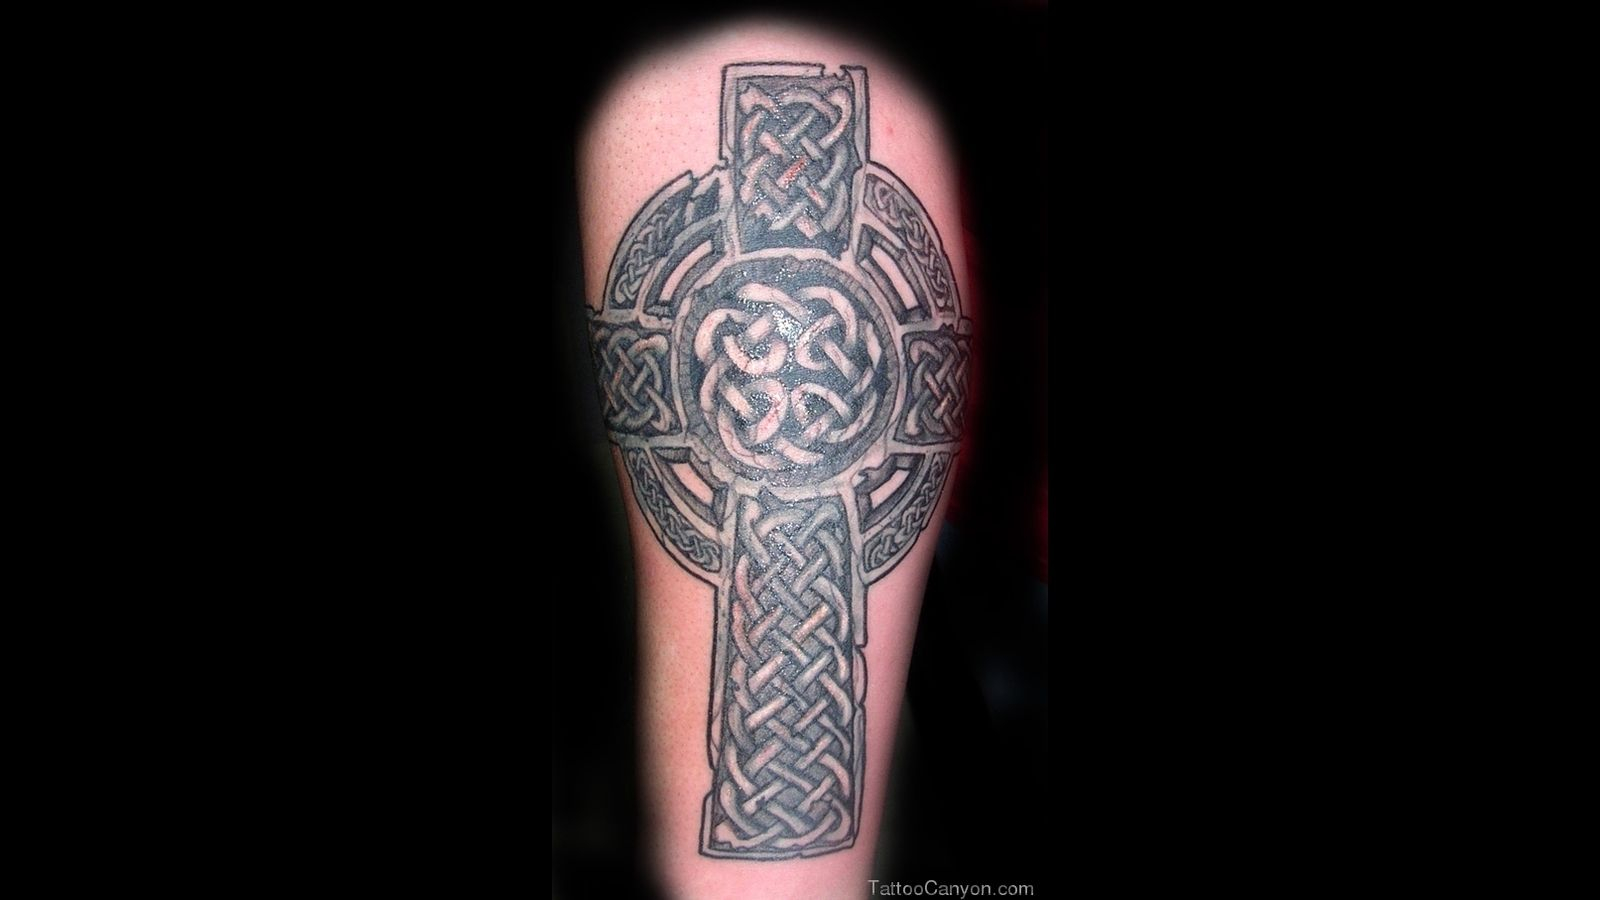 Scottishgaeliccrosstattoos 19479 Celtic Tattoos Design Free intended for dimensions 1600 X 900